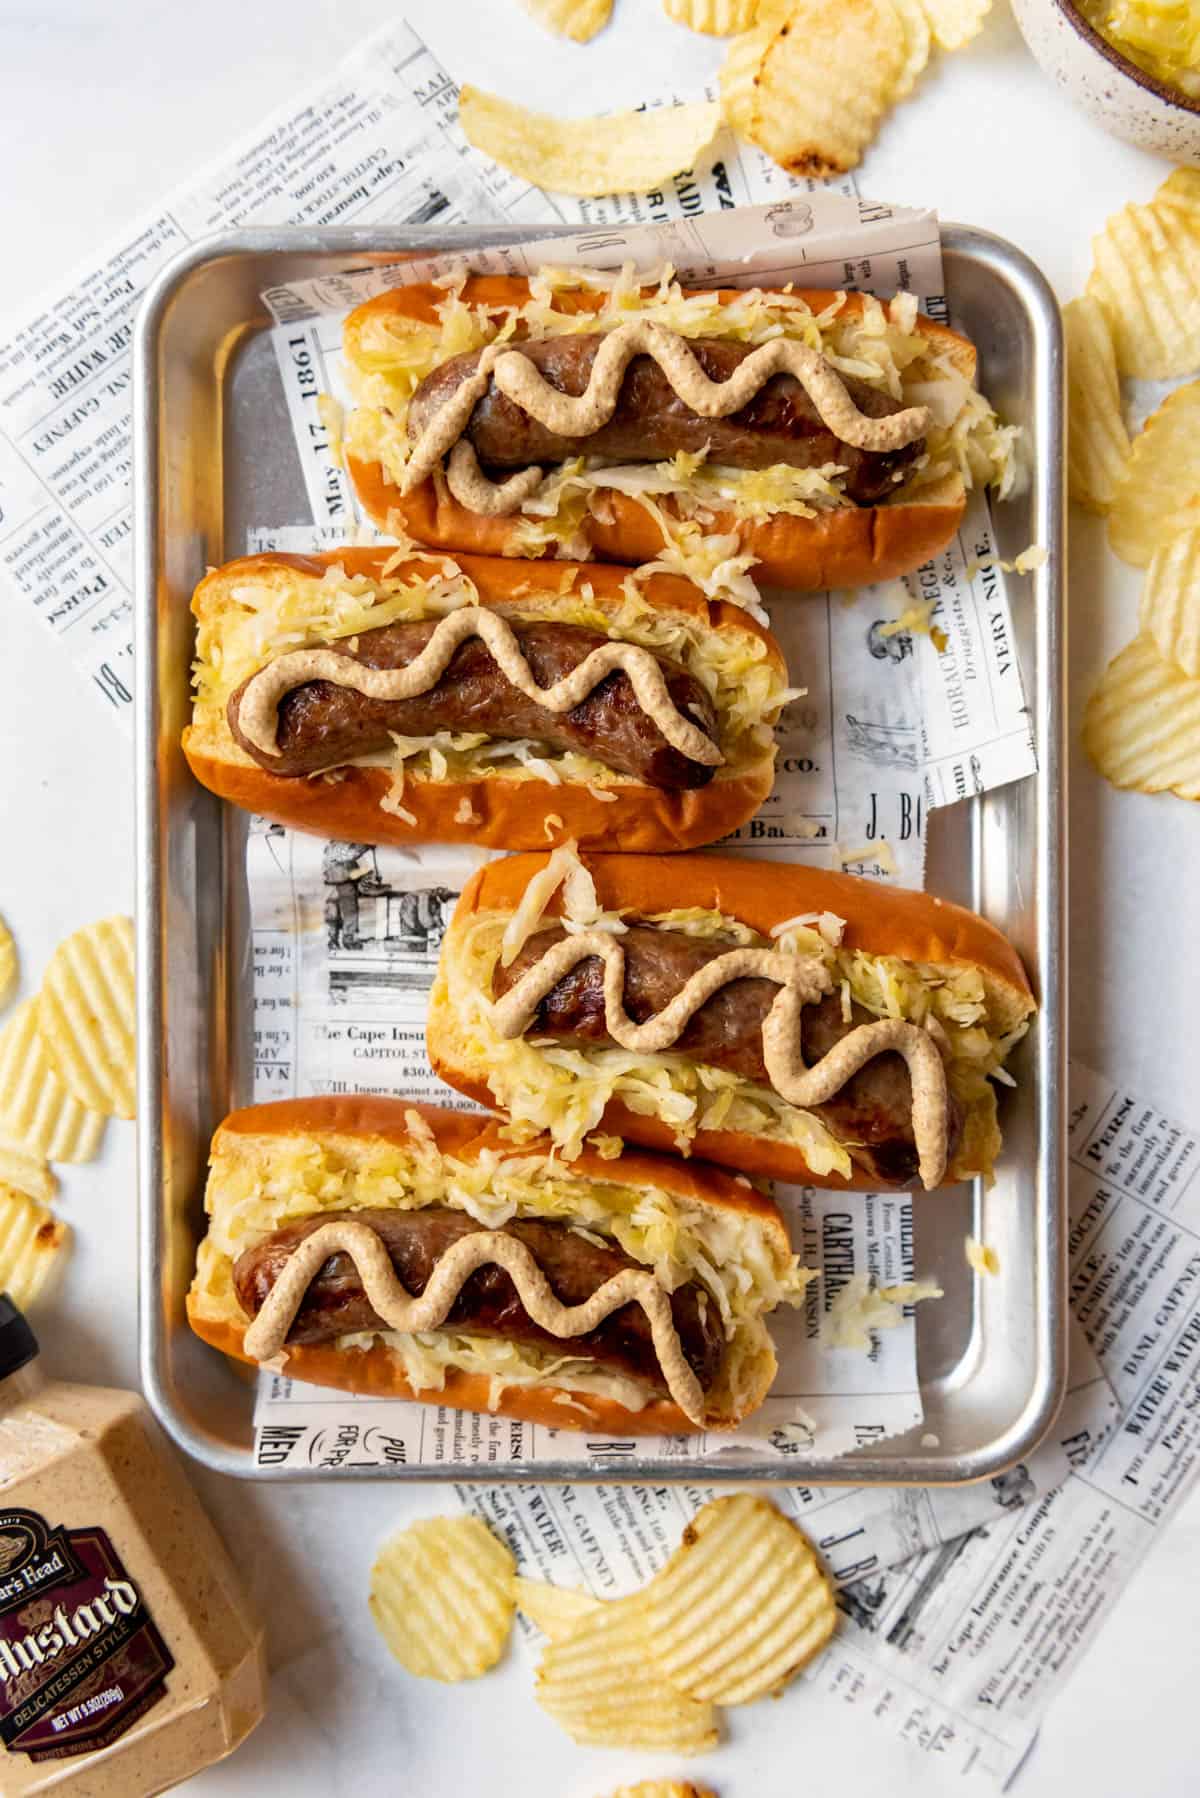 Top view of Air fryer brats on buns with mustard and sauerkraut.